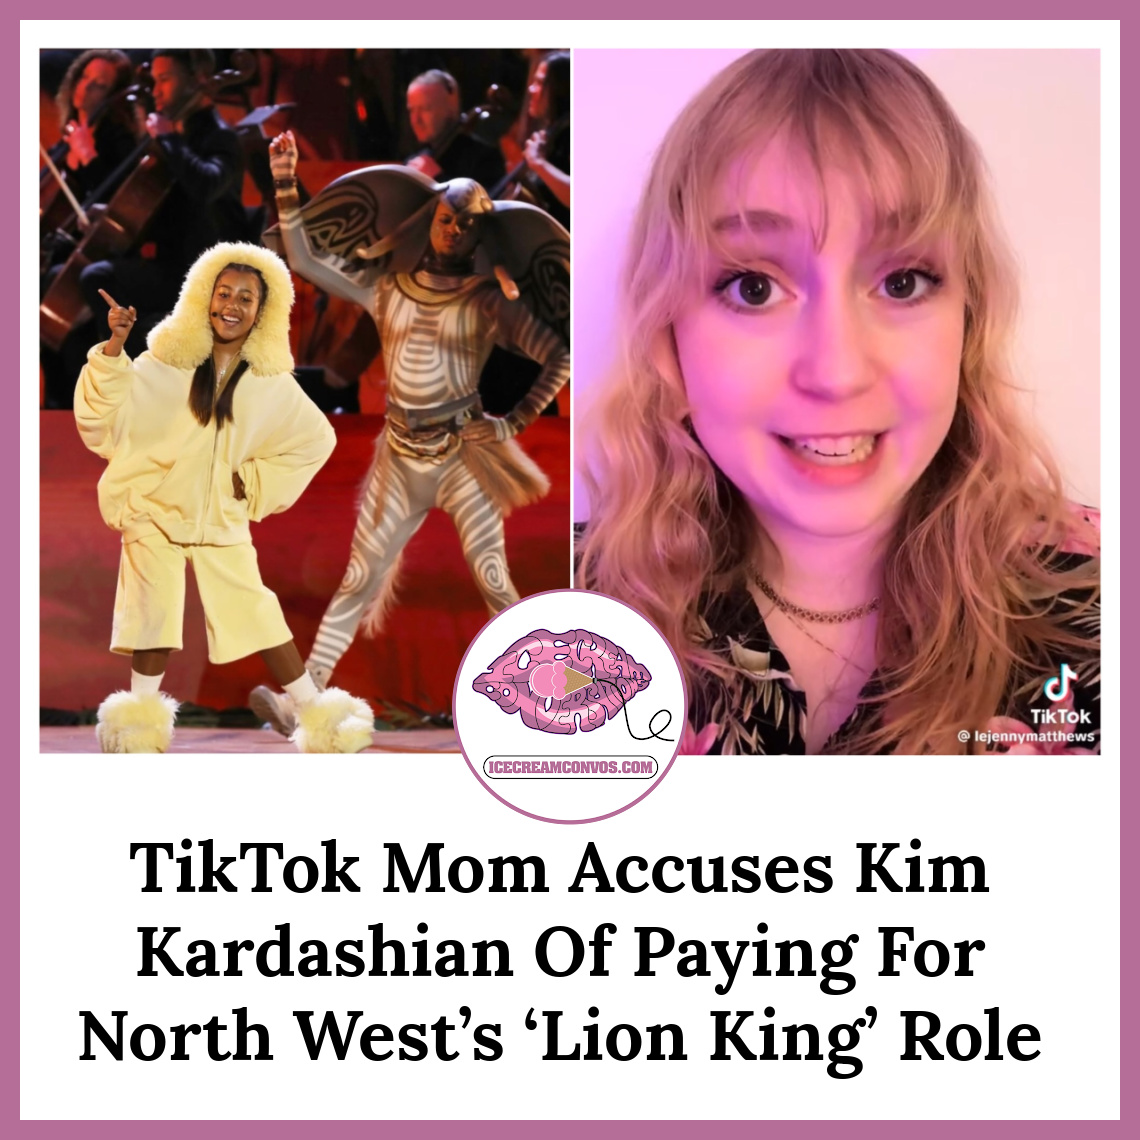 A mom took to TikTok to air her grievances after she said Kim Kardashian pulled strings and allegedly paid for North West’s role in the 'Lion King.' 🦁💰️👀🖤🍦 bit.ly/3yxRCSu

#NorthWest #KimKardashian #LionKing #HollywoodBowl #JennyMatthews #IceCreamConvos